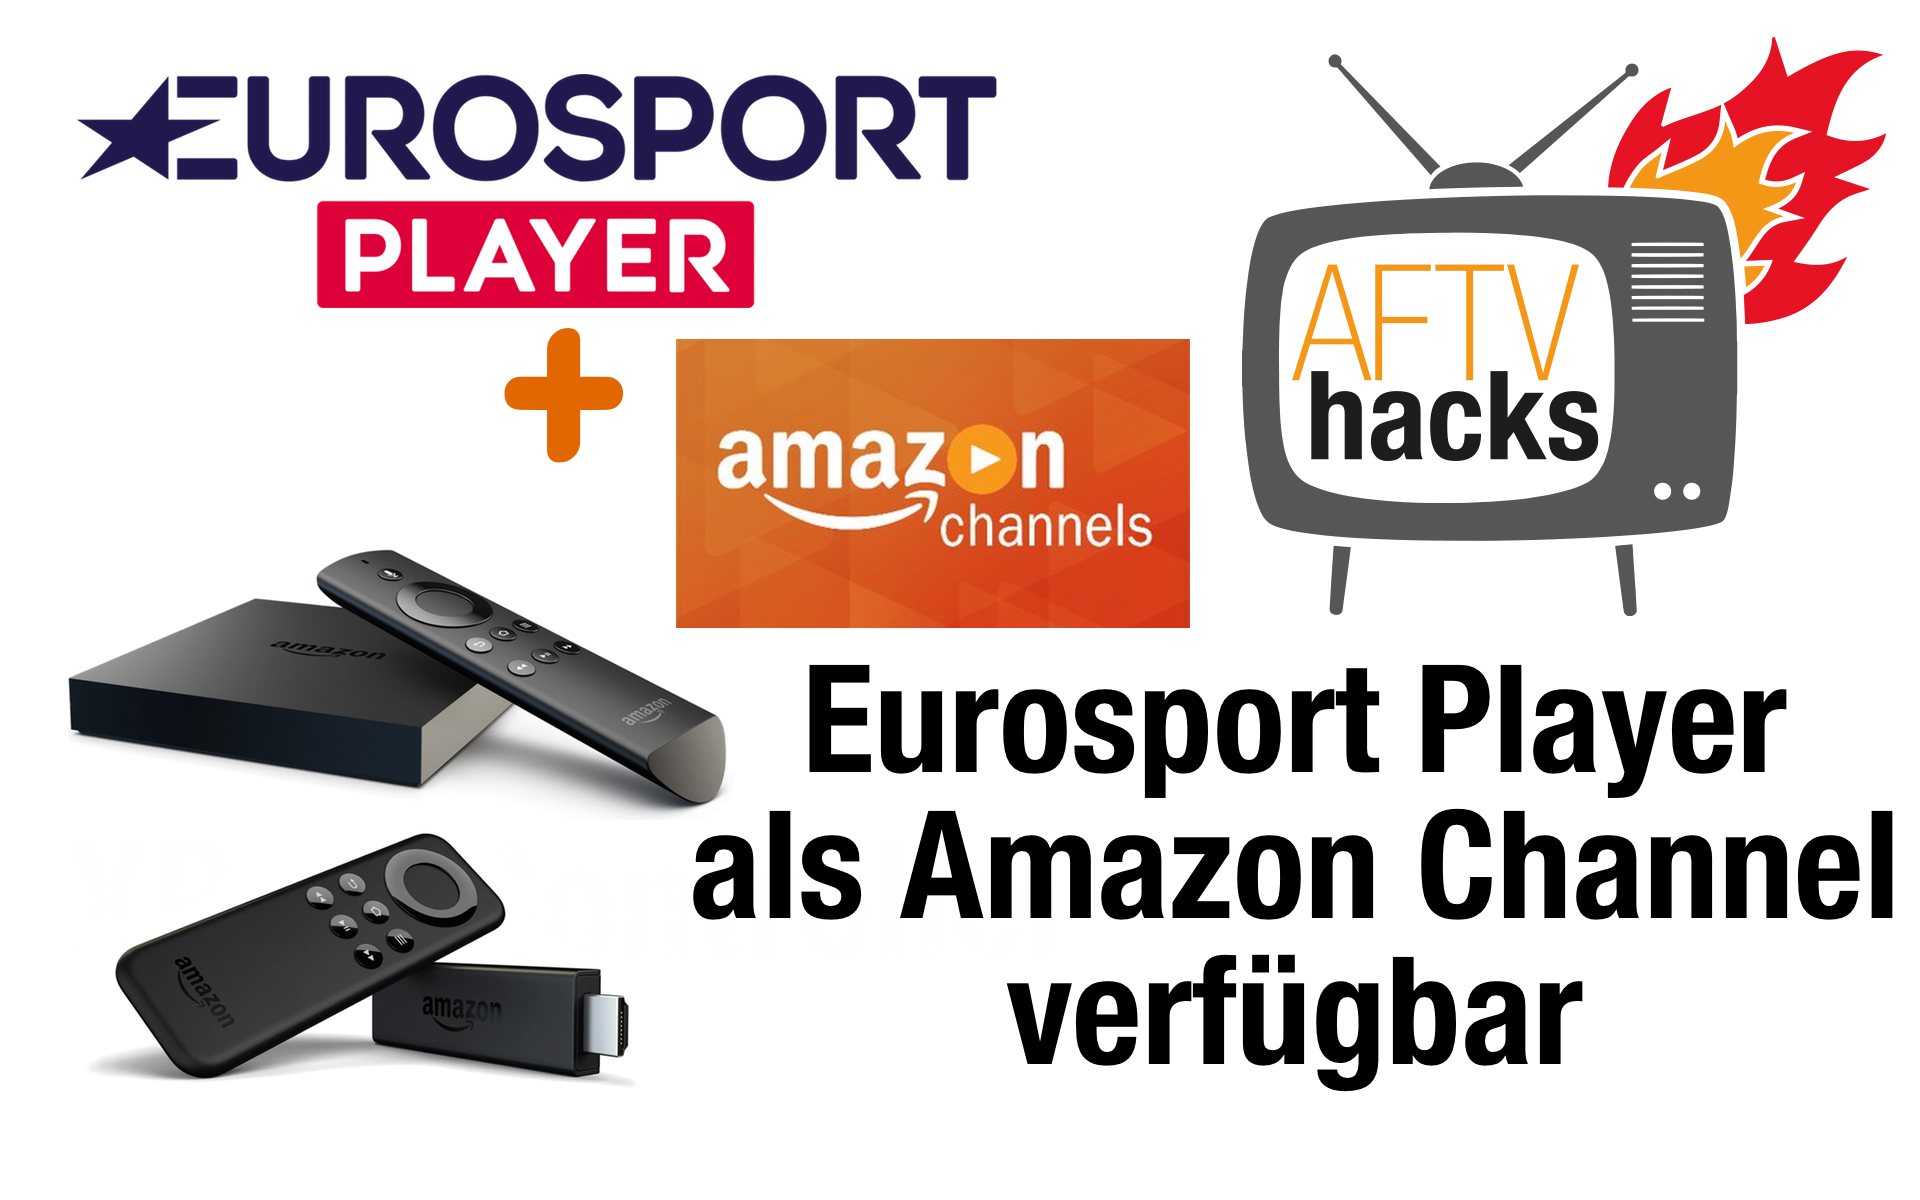 Eurosport Player via Amazon Channel auf Fire TV, PC, Handy and Tablet!